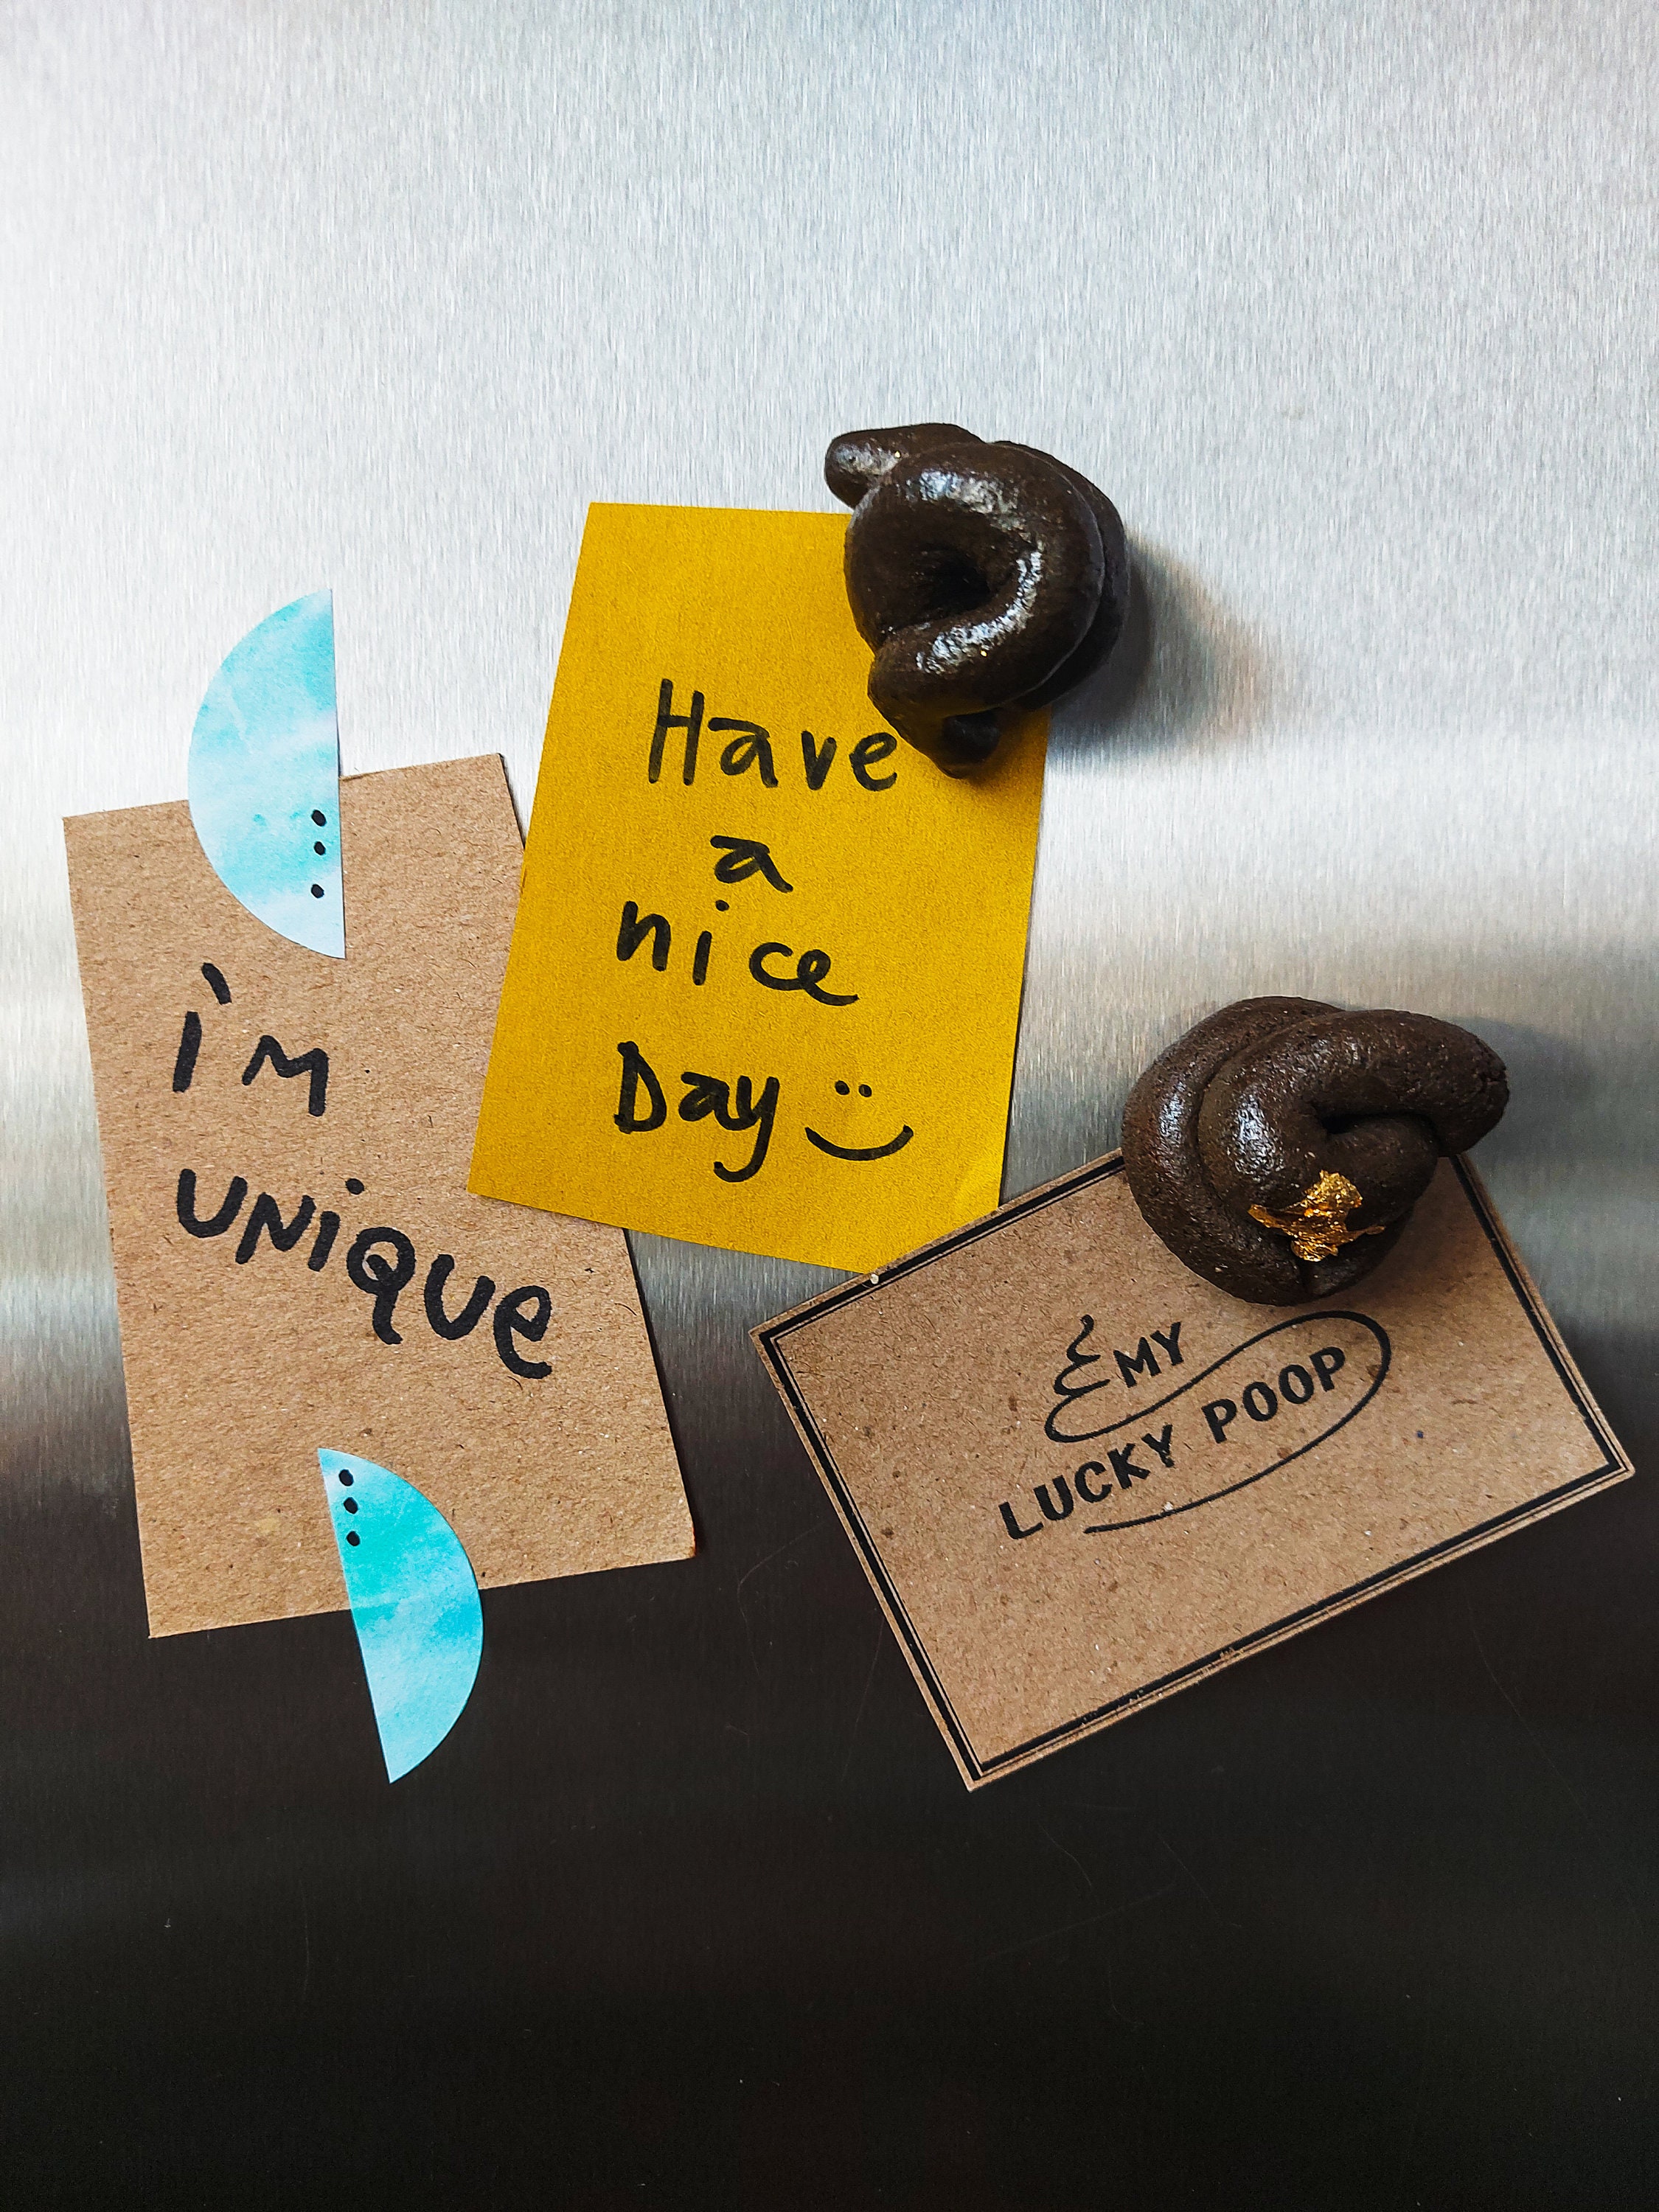 must have funny fun gift for happiness for you and best friends unique and homemade happy lucky poop Real poop magnet brings good luck